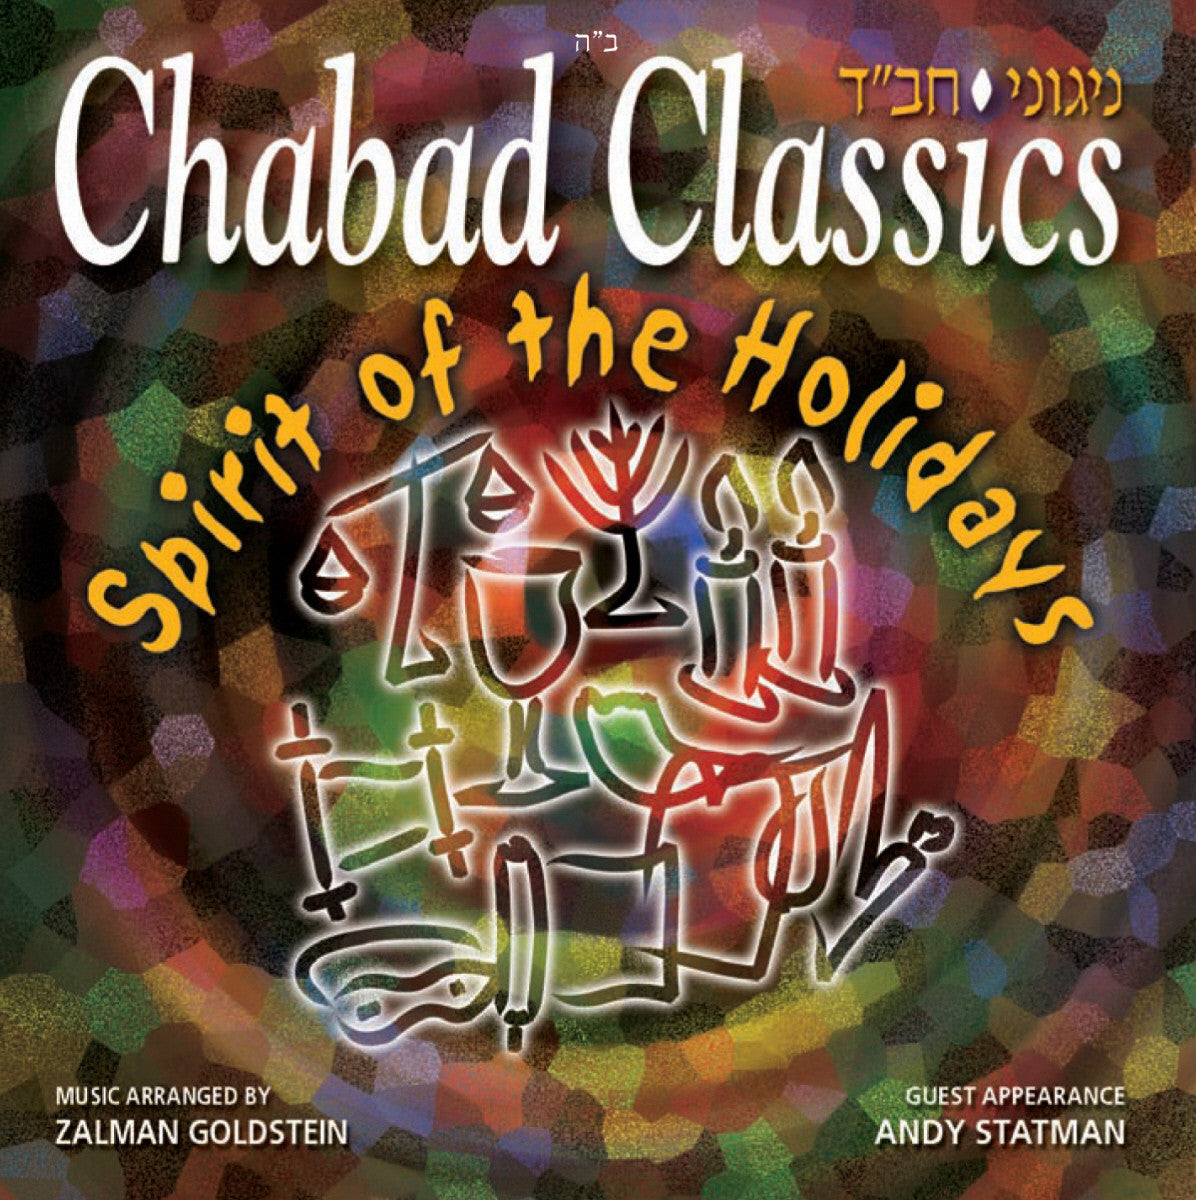 Andy Statman - Chabad Classics IV - Spirit Of The Holidays